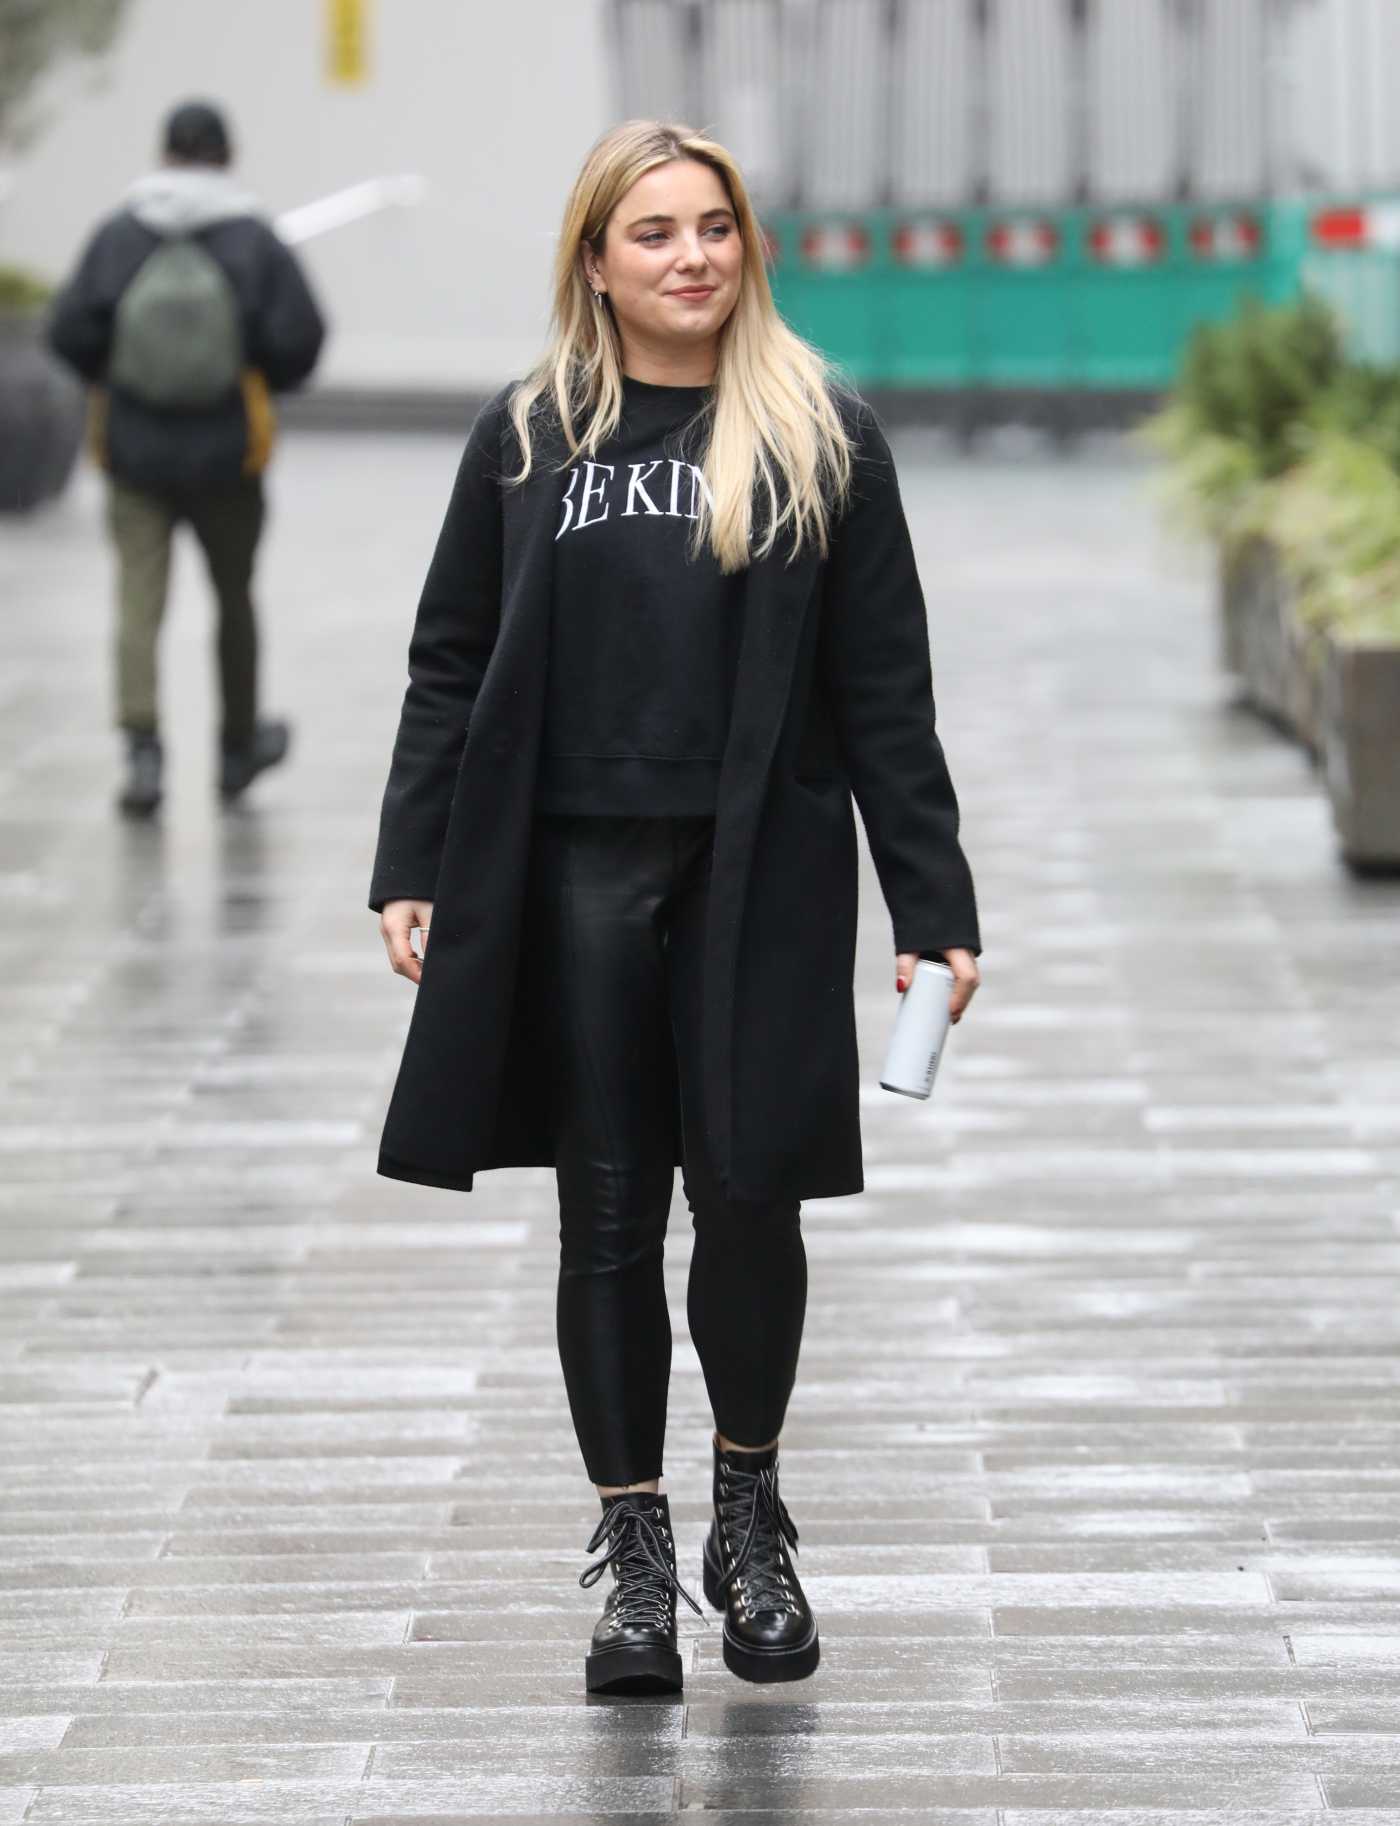 Sian Welby in a Black Outfit Leaves the Global Radio Studios in London 01/27/2021